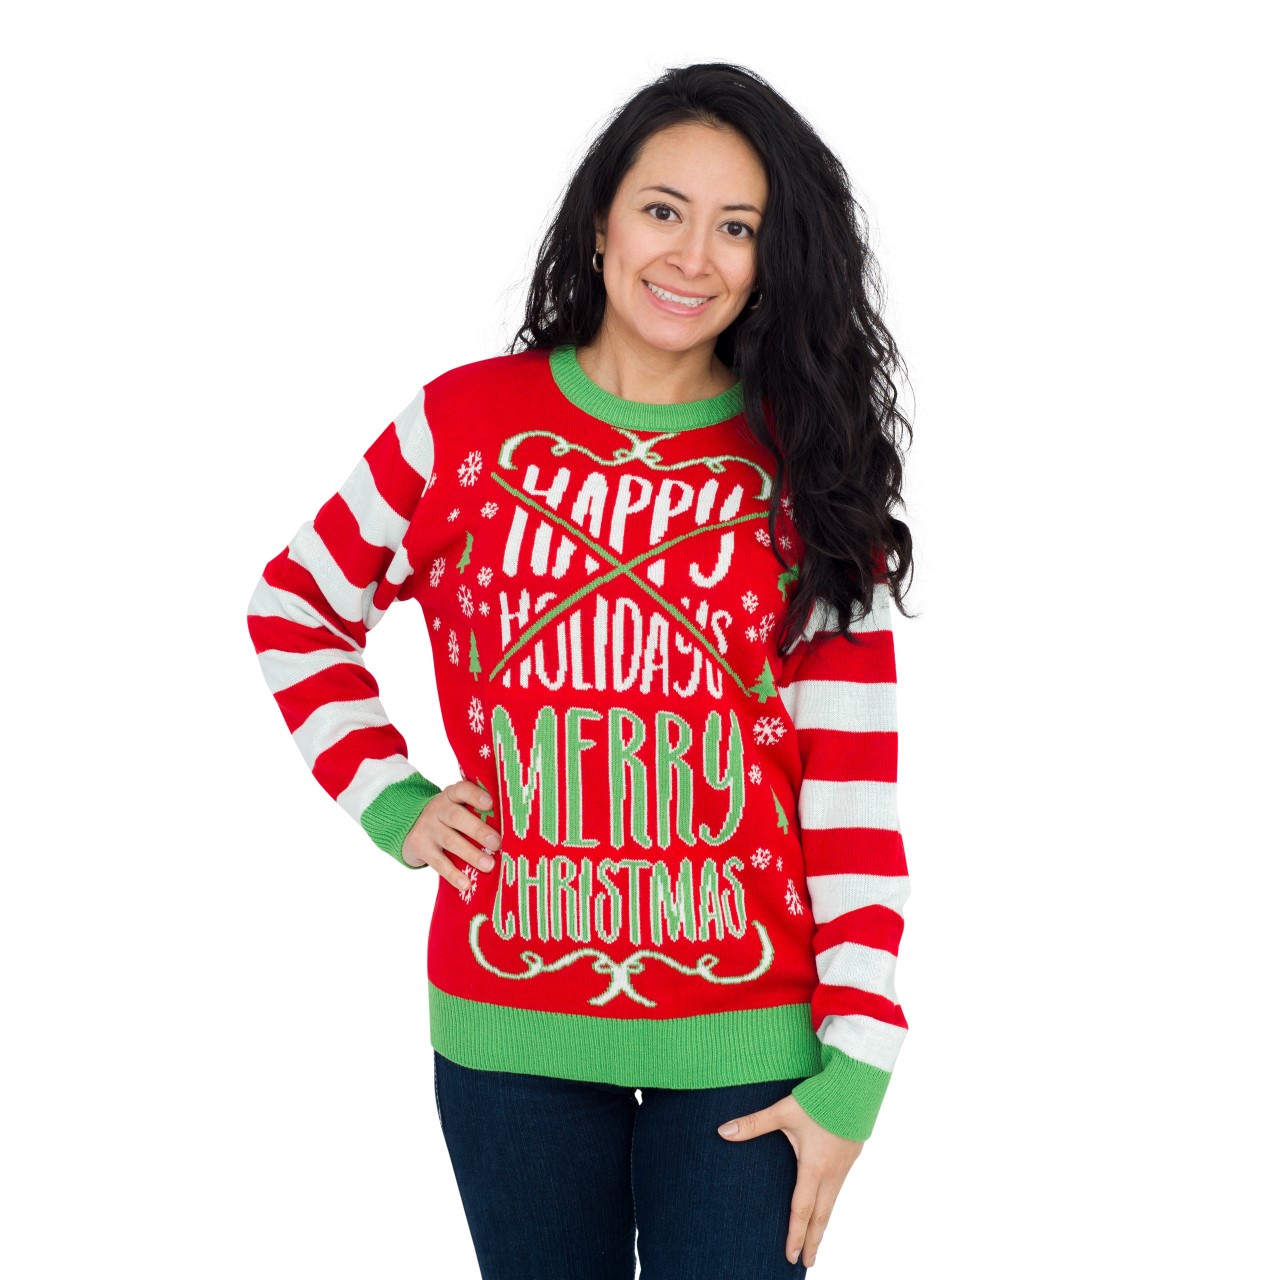 Women’s Happy Holidays Merry Christmas Sweater,Ugly Christmas Sweaters | Funny Xmas Sweaters for Men and Women